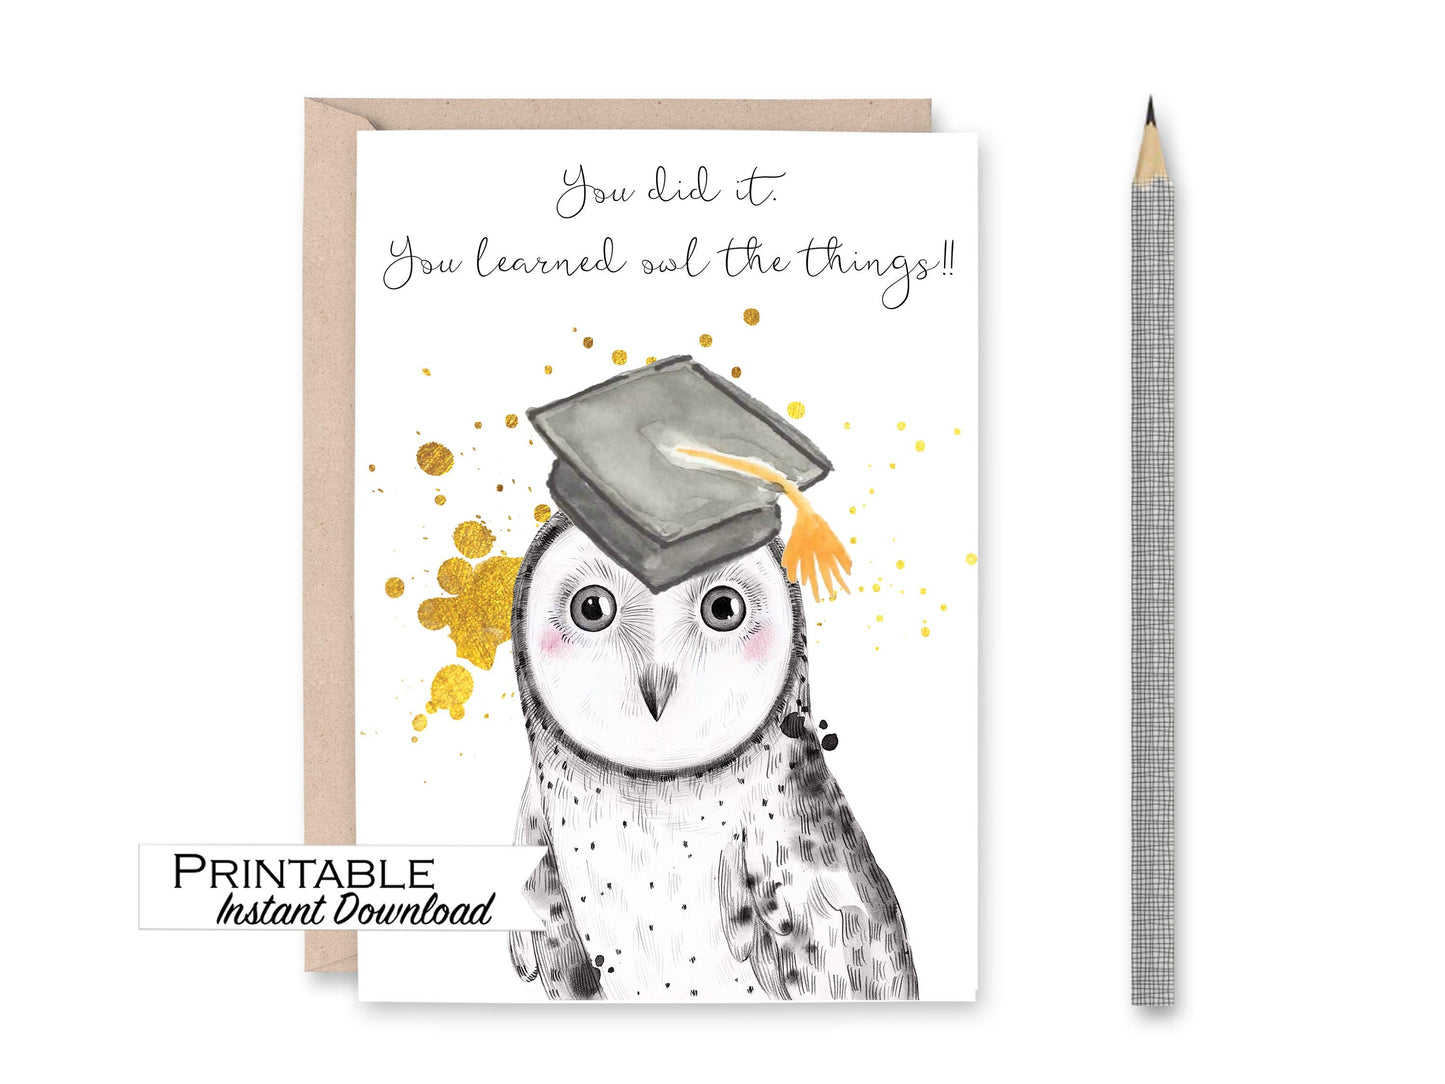 Owl Graduation Card - You did it, You Learned Owl the Things (All the Things)